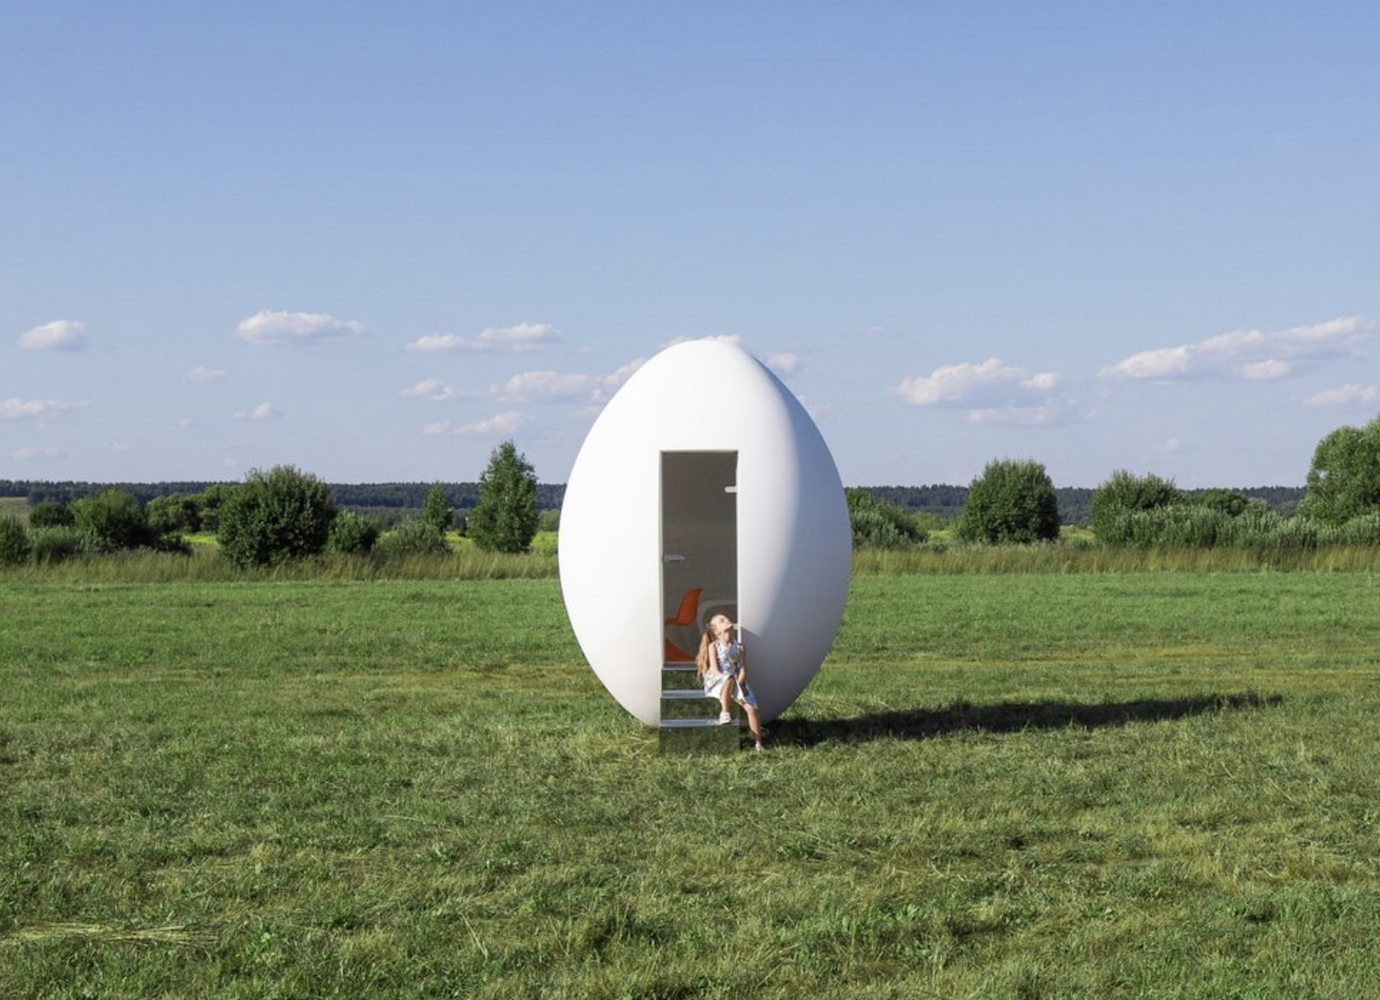 Inside the egg-shaped playhouse from the future | Concrete Ideas